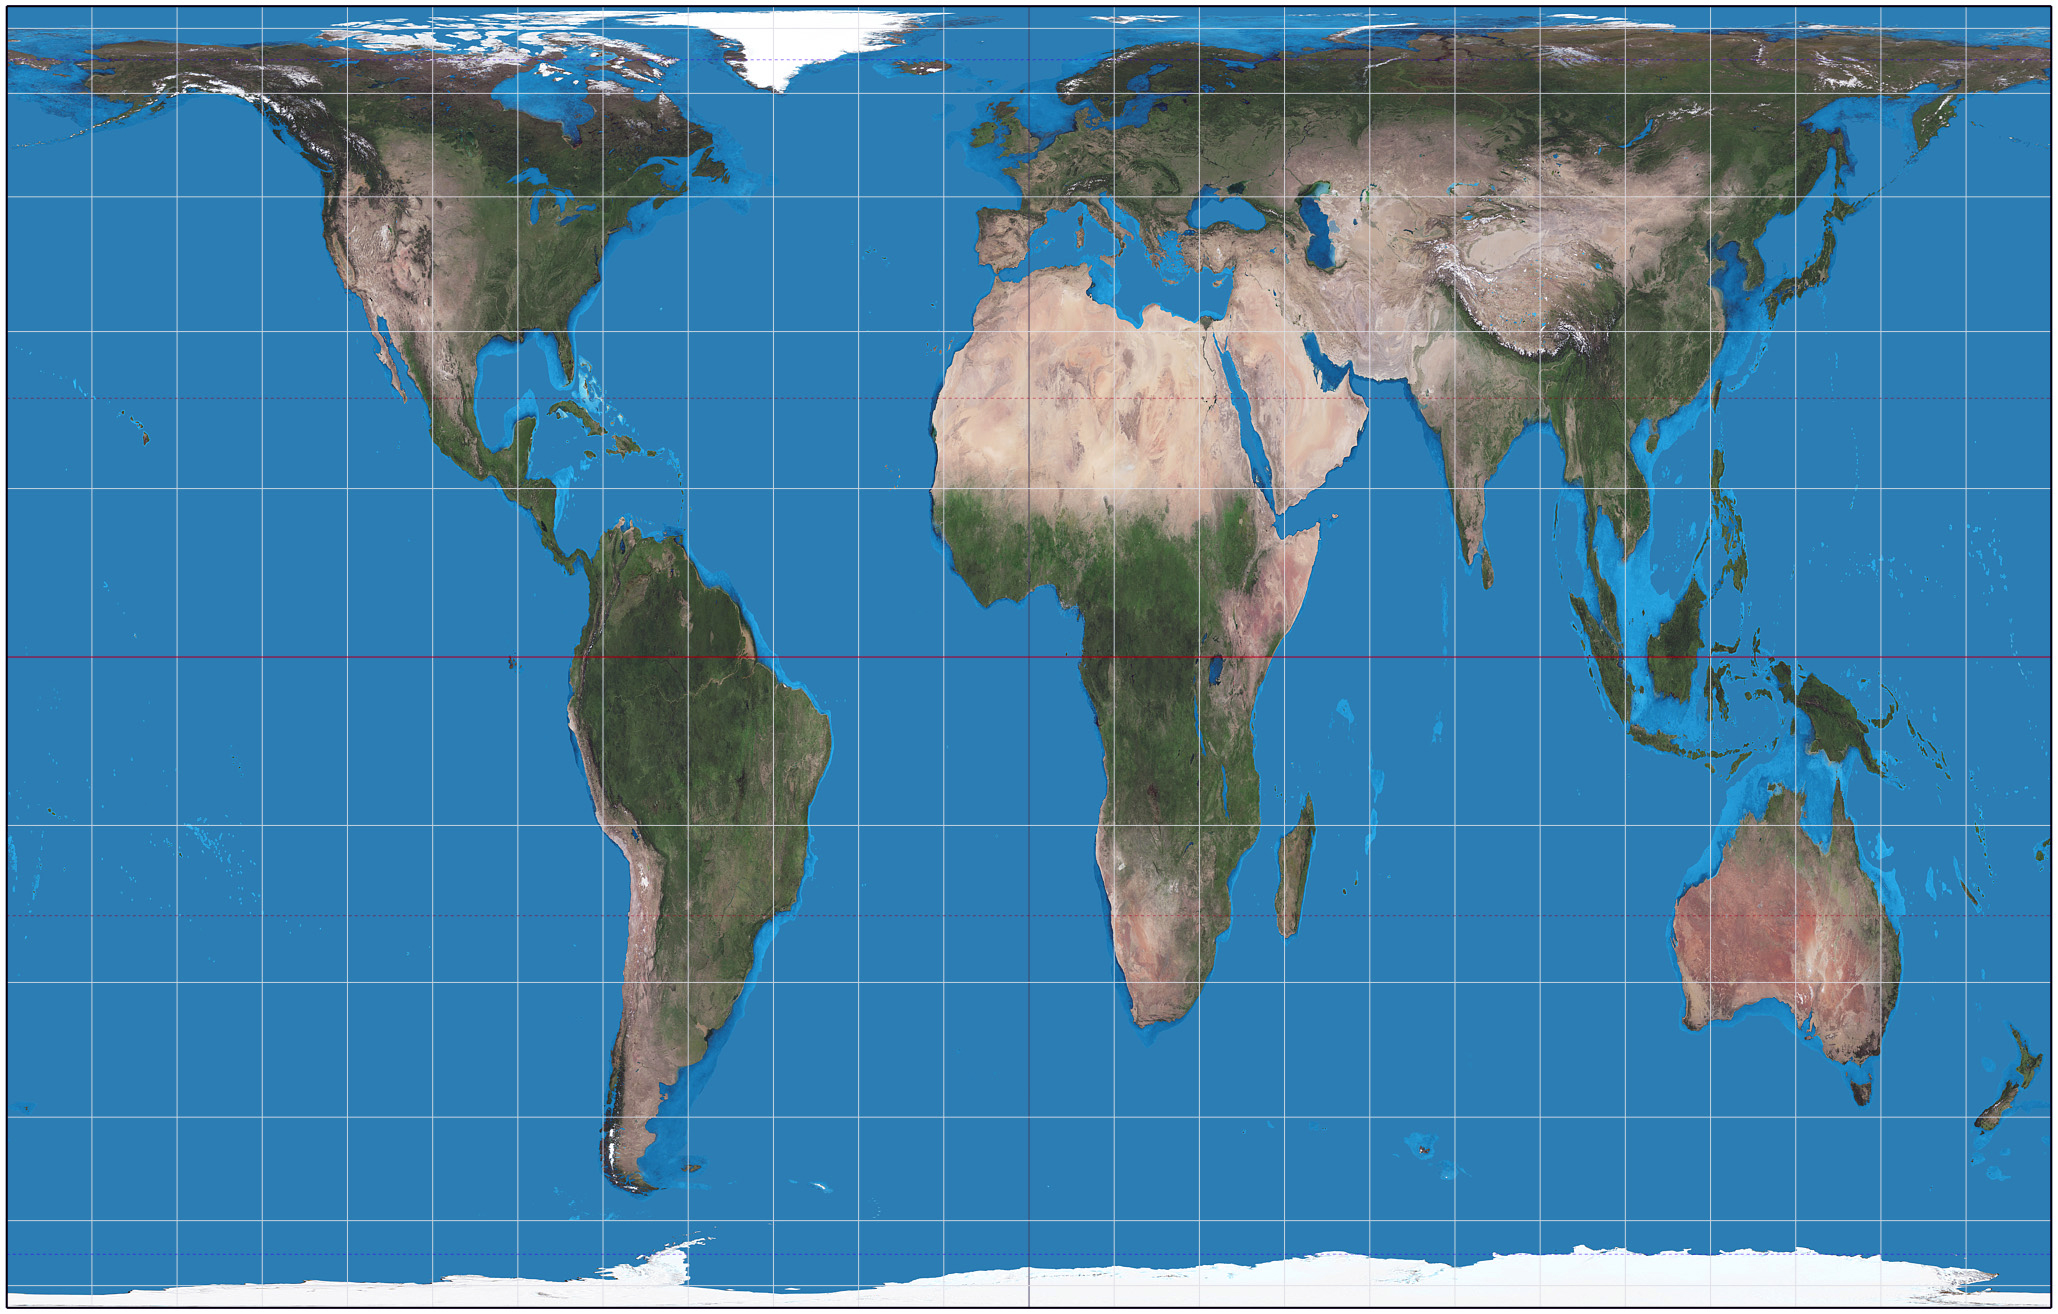 A more accurate map showing the relative sizes of continents. Gall–Peters projection (map: Strebe, CC BY-SA 3.0)